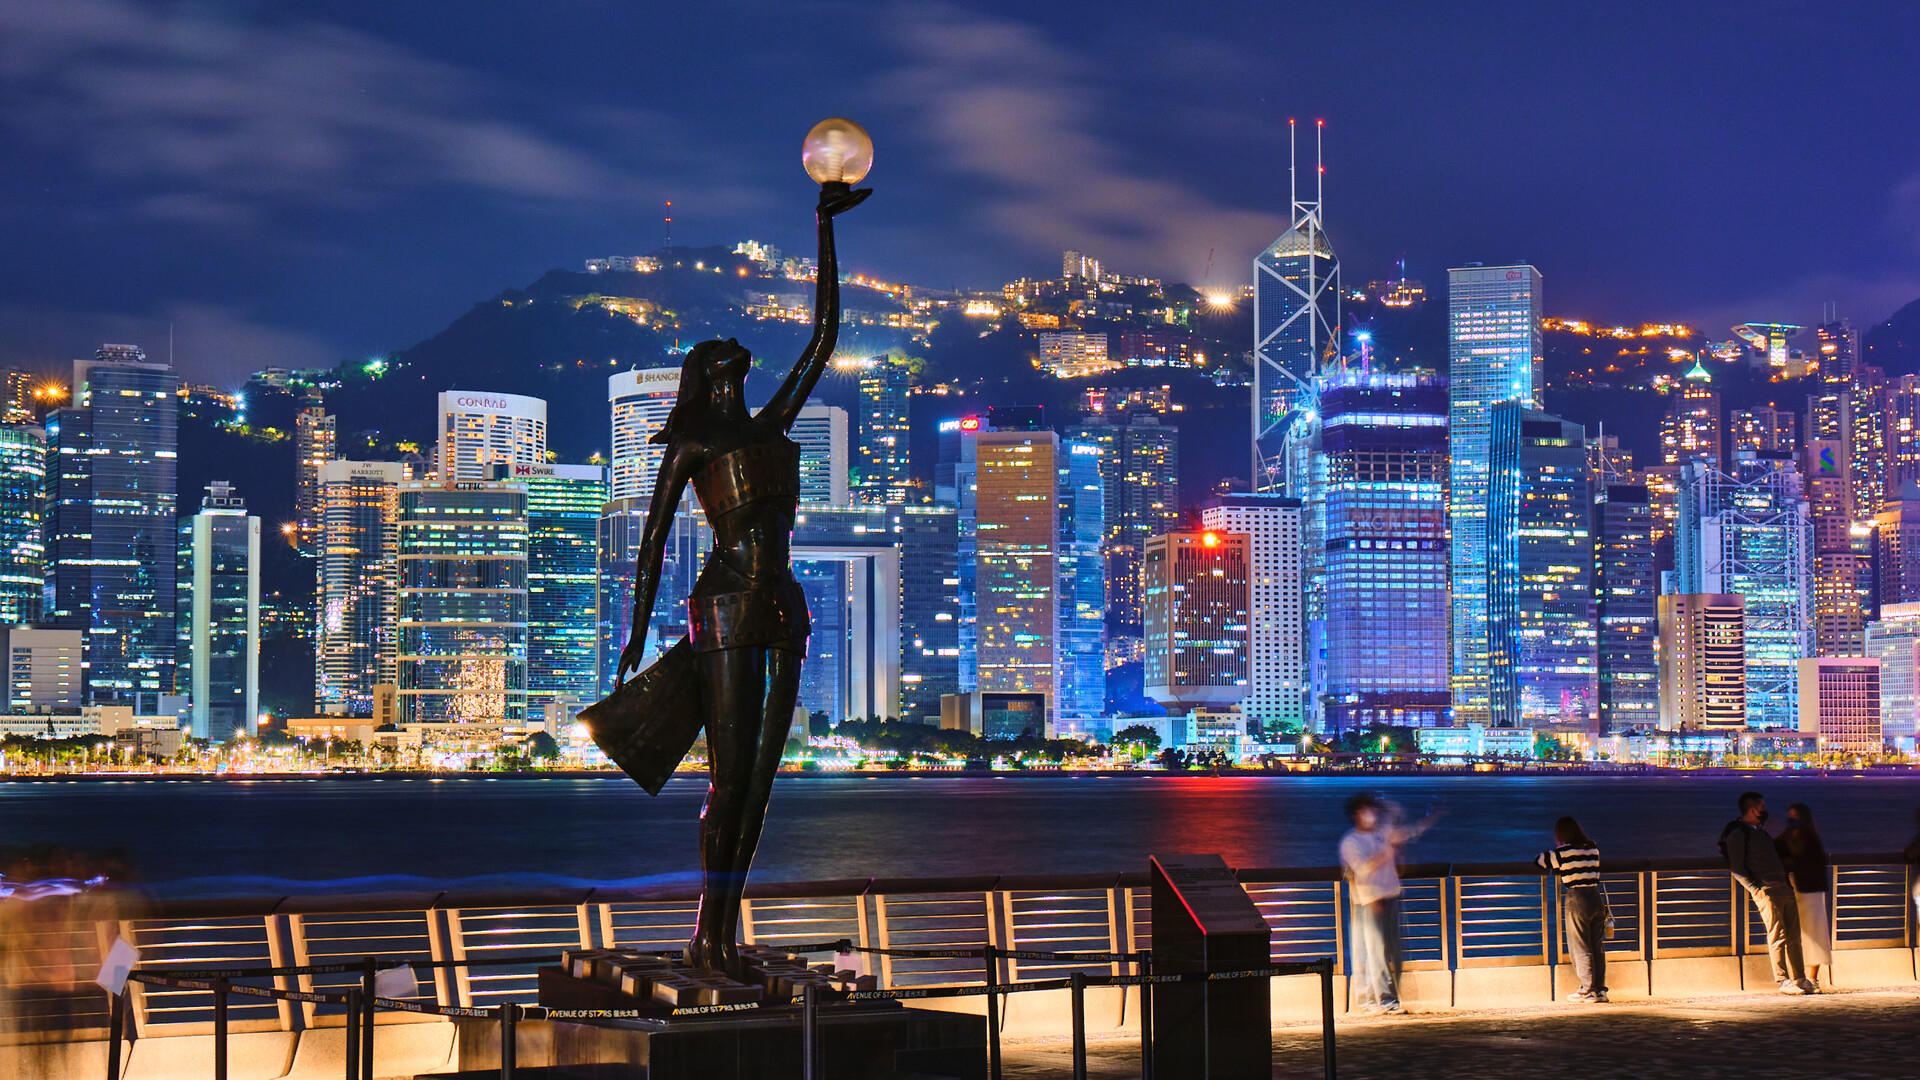 Statue in foreground with city skyline and illuminated buildings at night in the background. People nearby